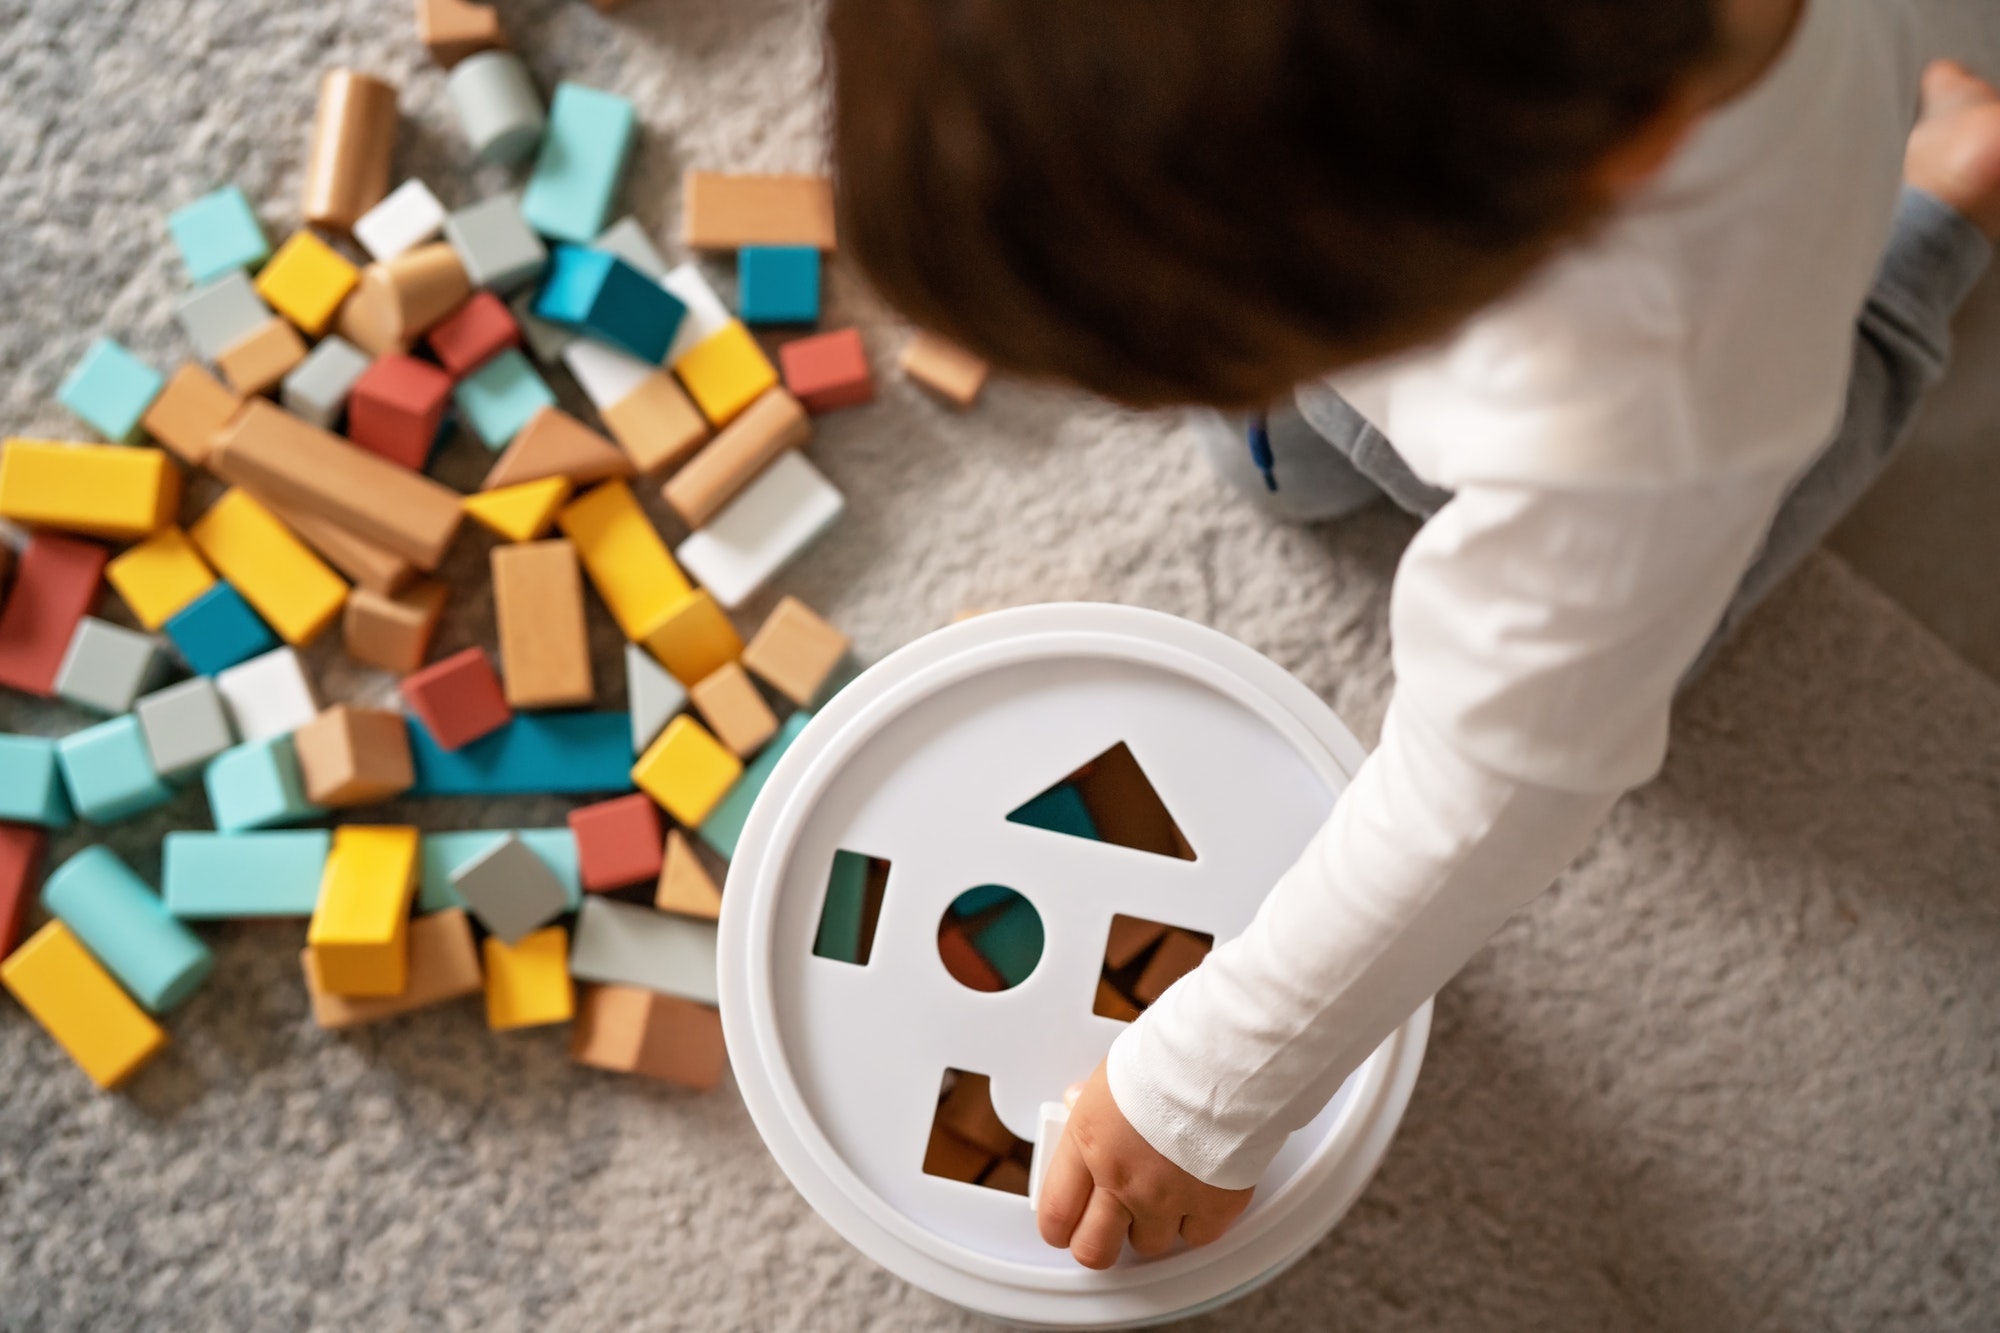 Top view of little toddler boy playing with wooden colorful building blocks sorting shapes. Child mo